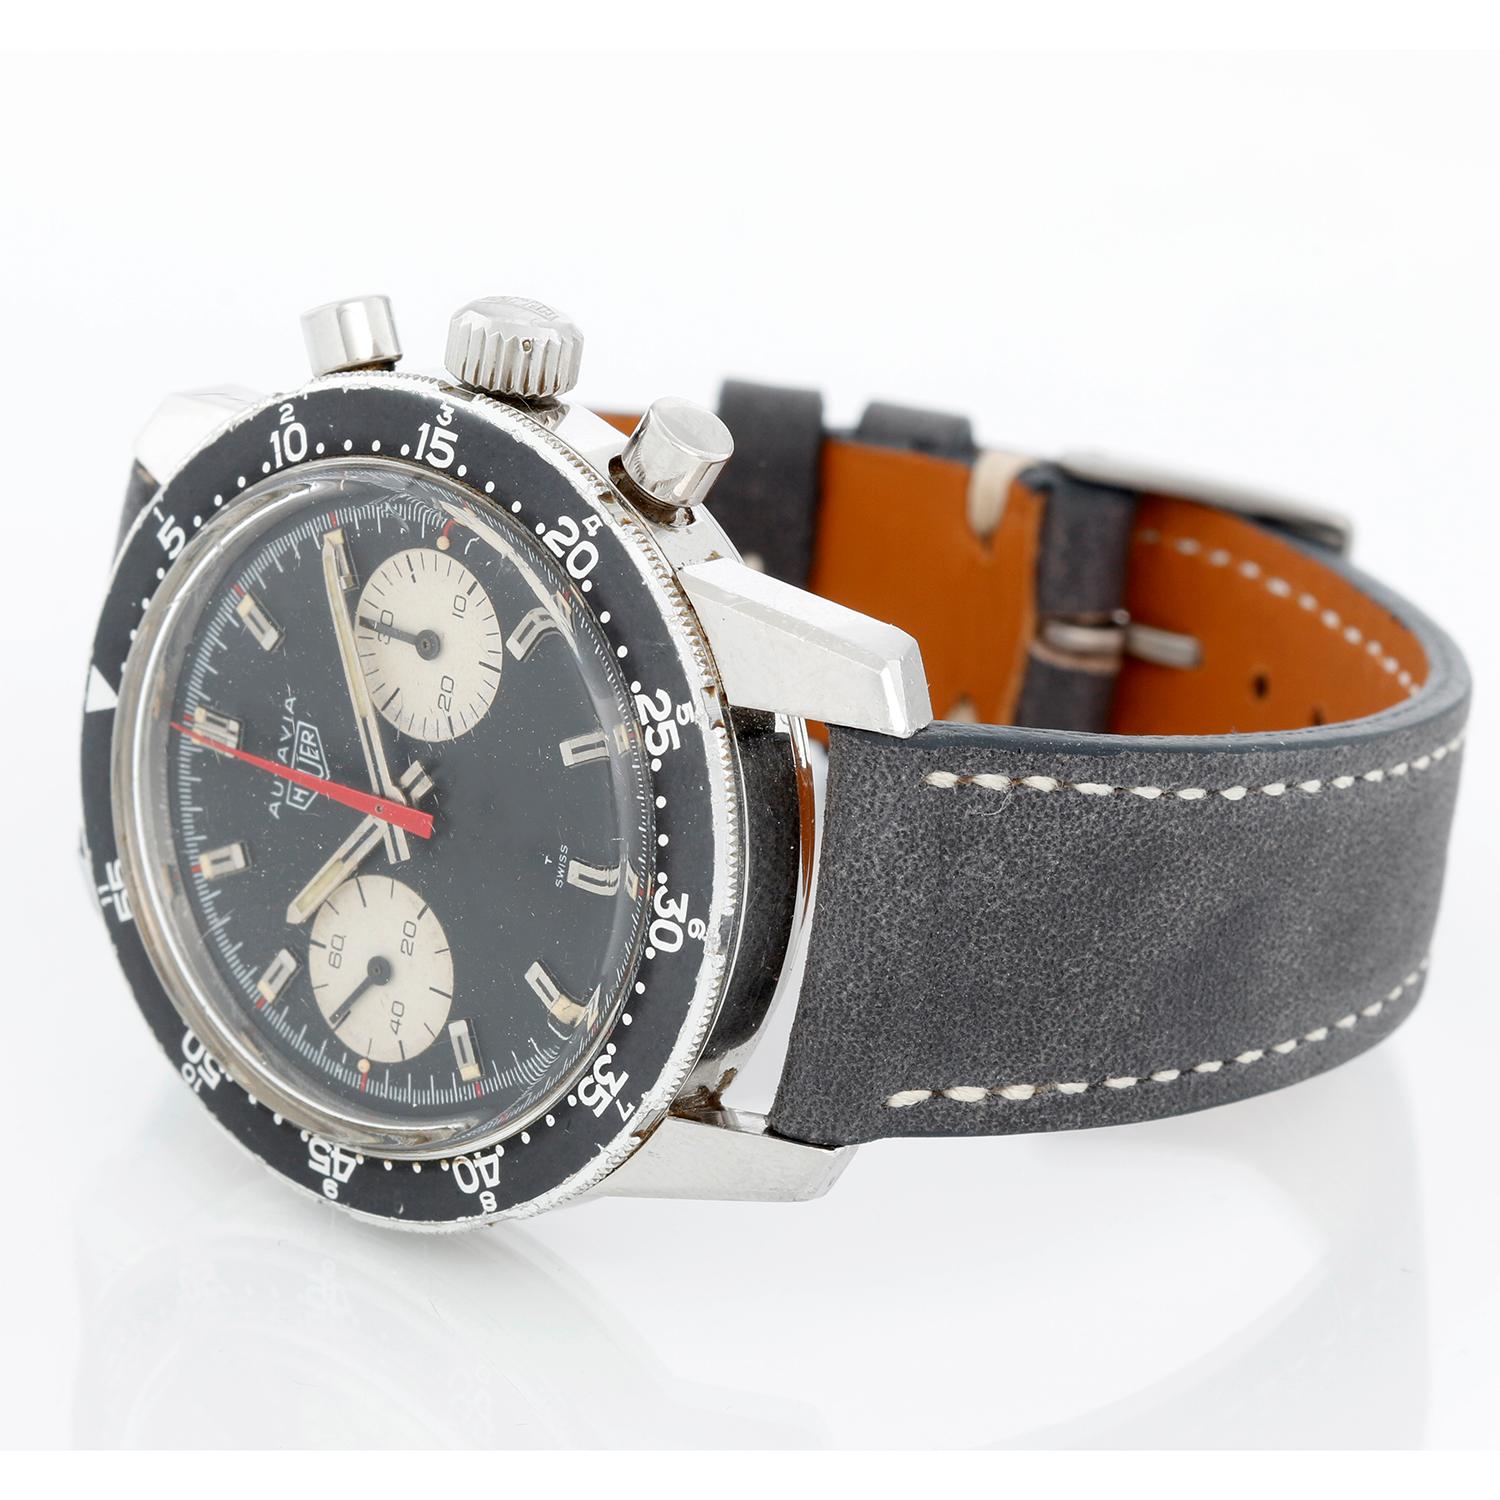 Vintage Heuer Autavia Chronograph - Manual winding. Stainless steel ( 40mm ). Black dial with silver markers and white registers with 7733 caliber movement. Strap band with buckle.  Very collectible vintage Heuer chronograph.  Pre-owned with custom